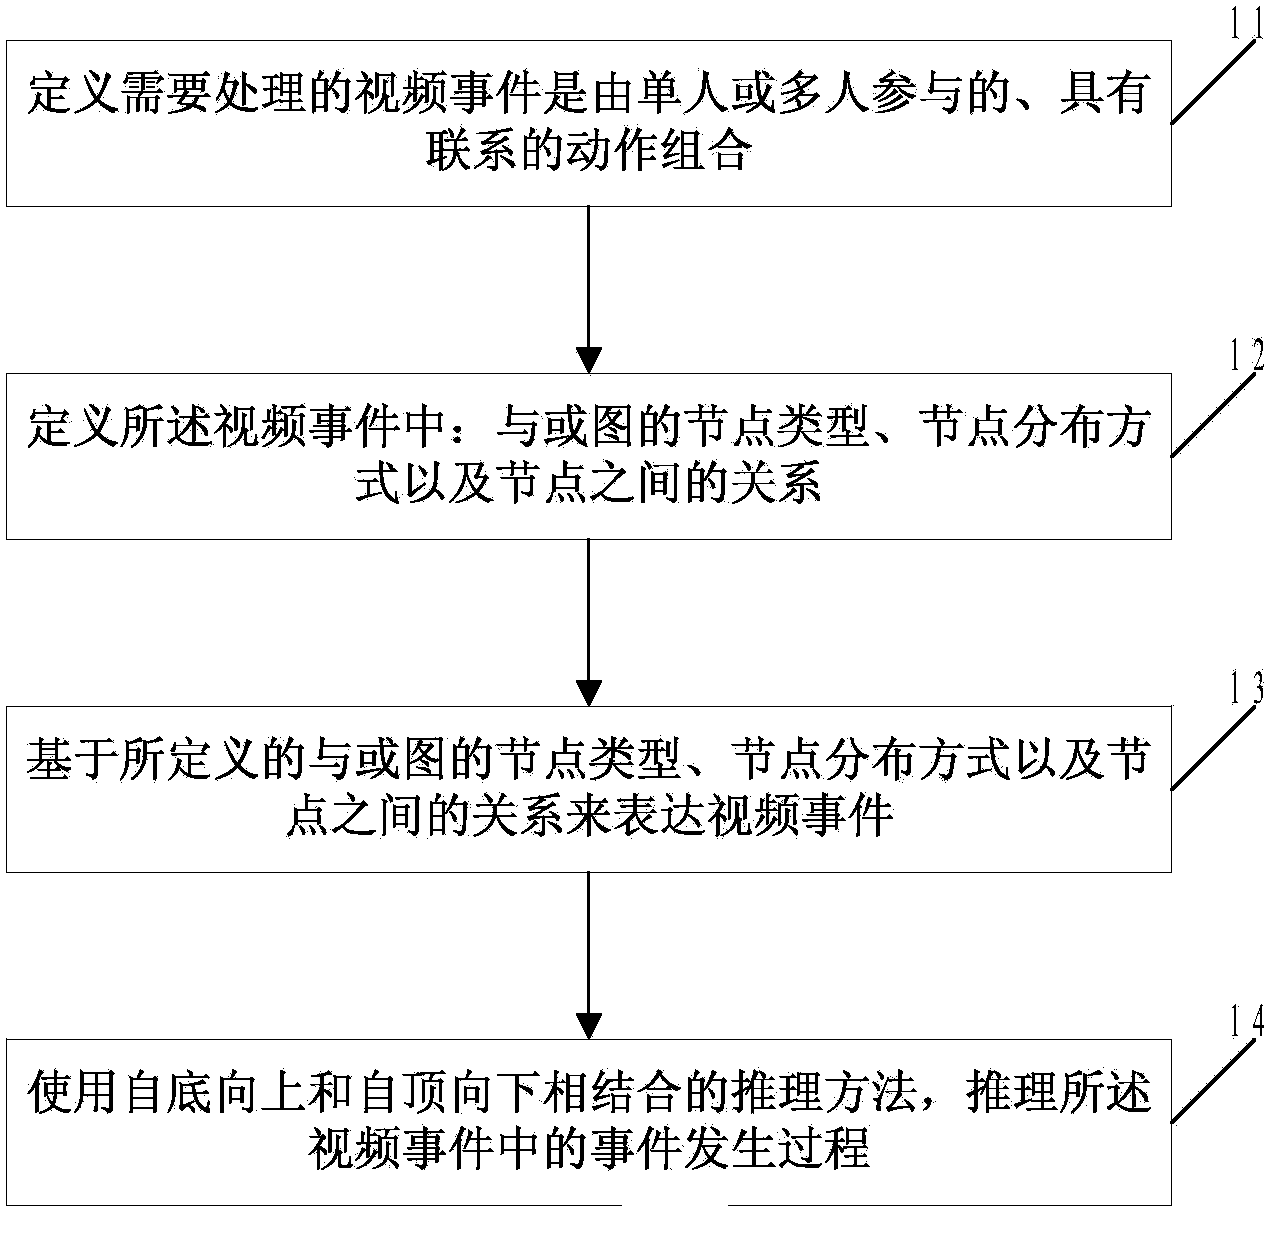 Video event processing method based on and-or graph